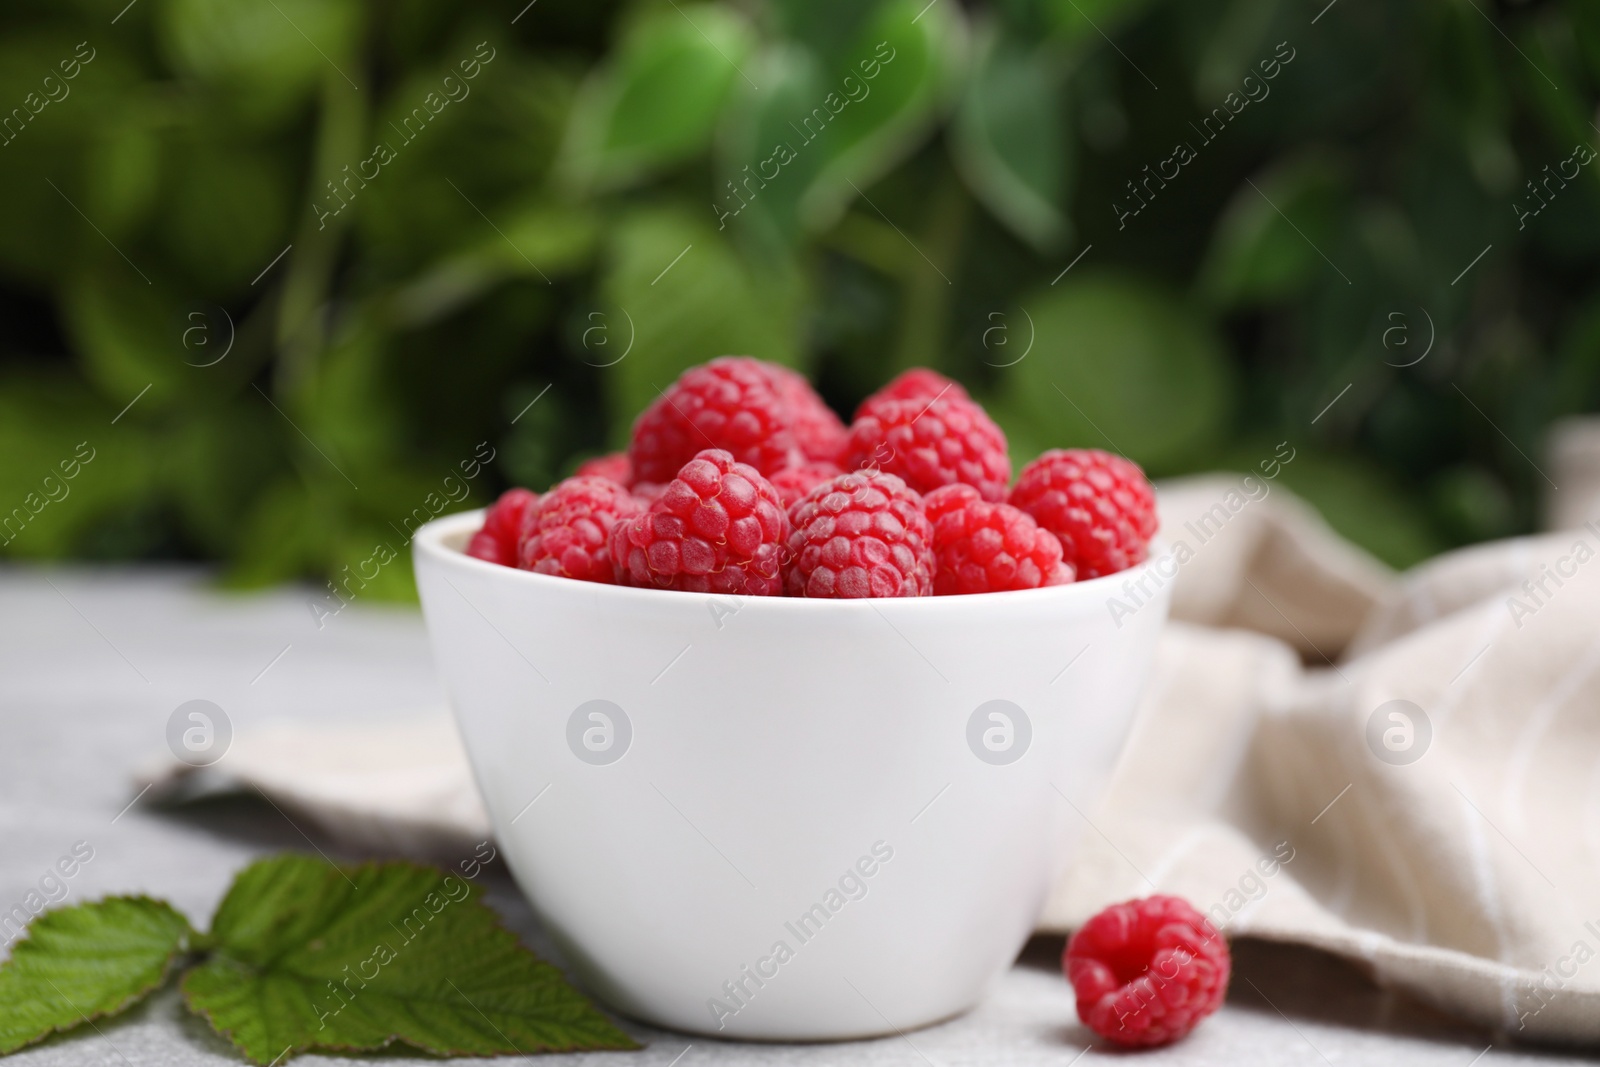 Photo of Bowl of fresh ripe raspberries with green leaves on light table against blurred background